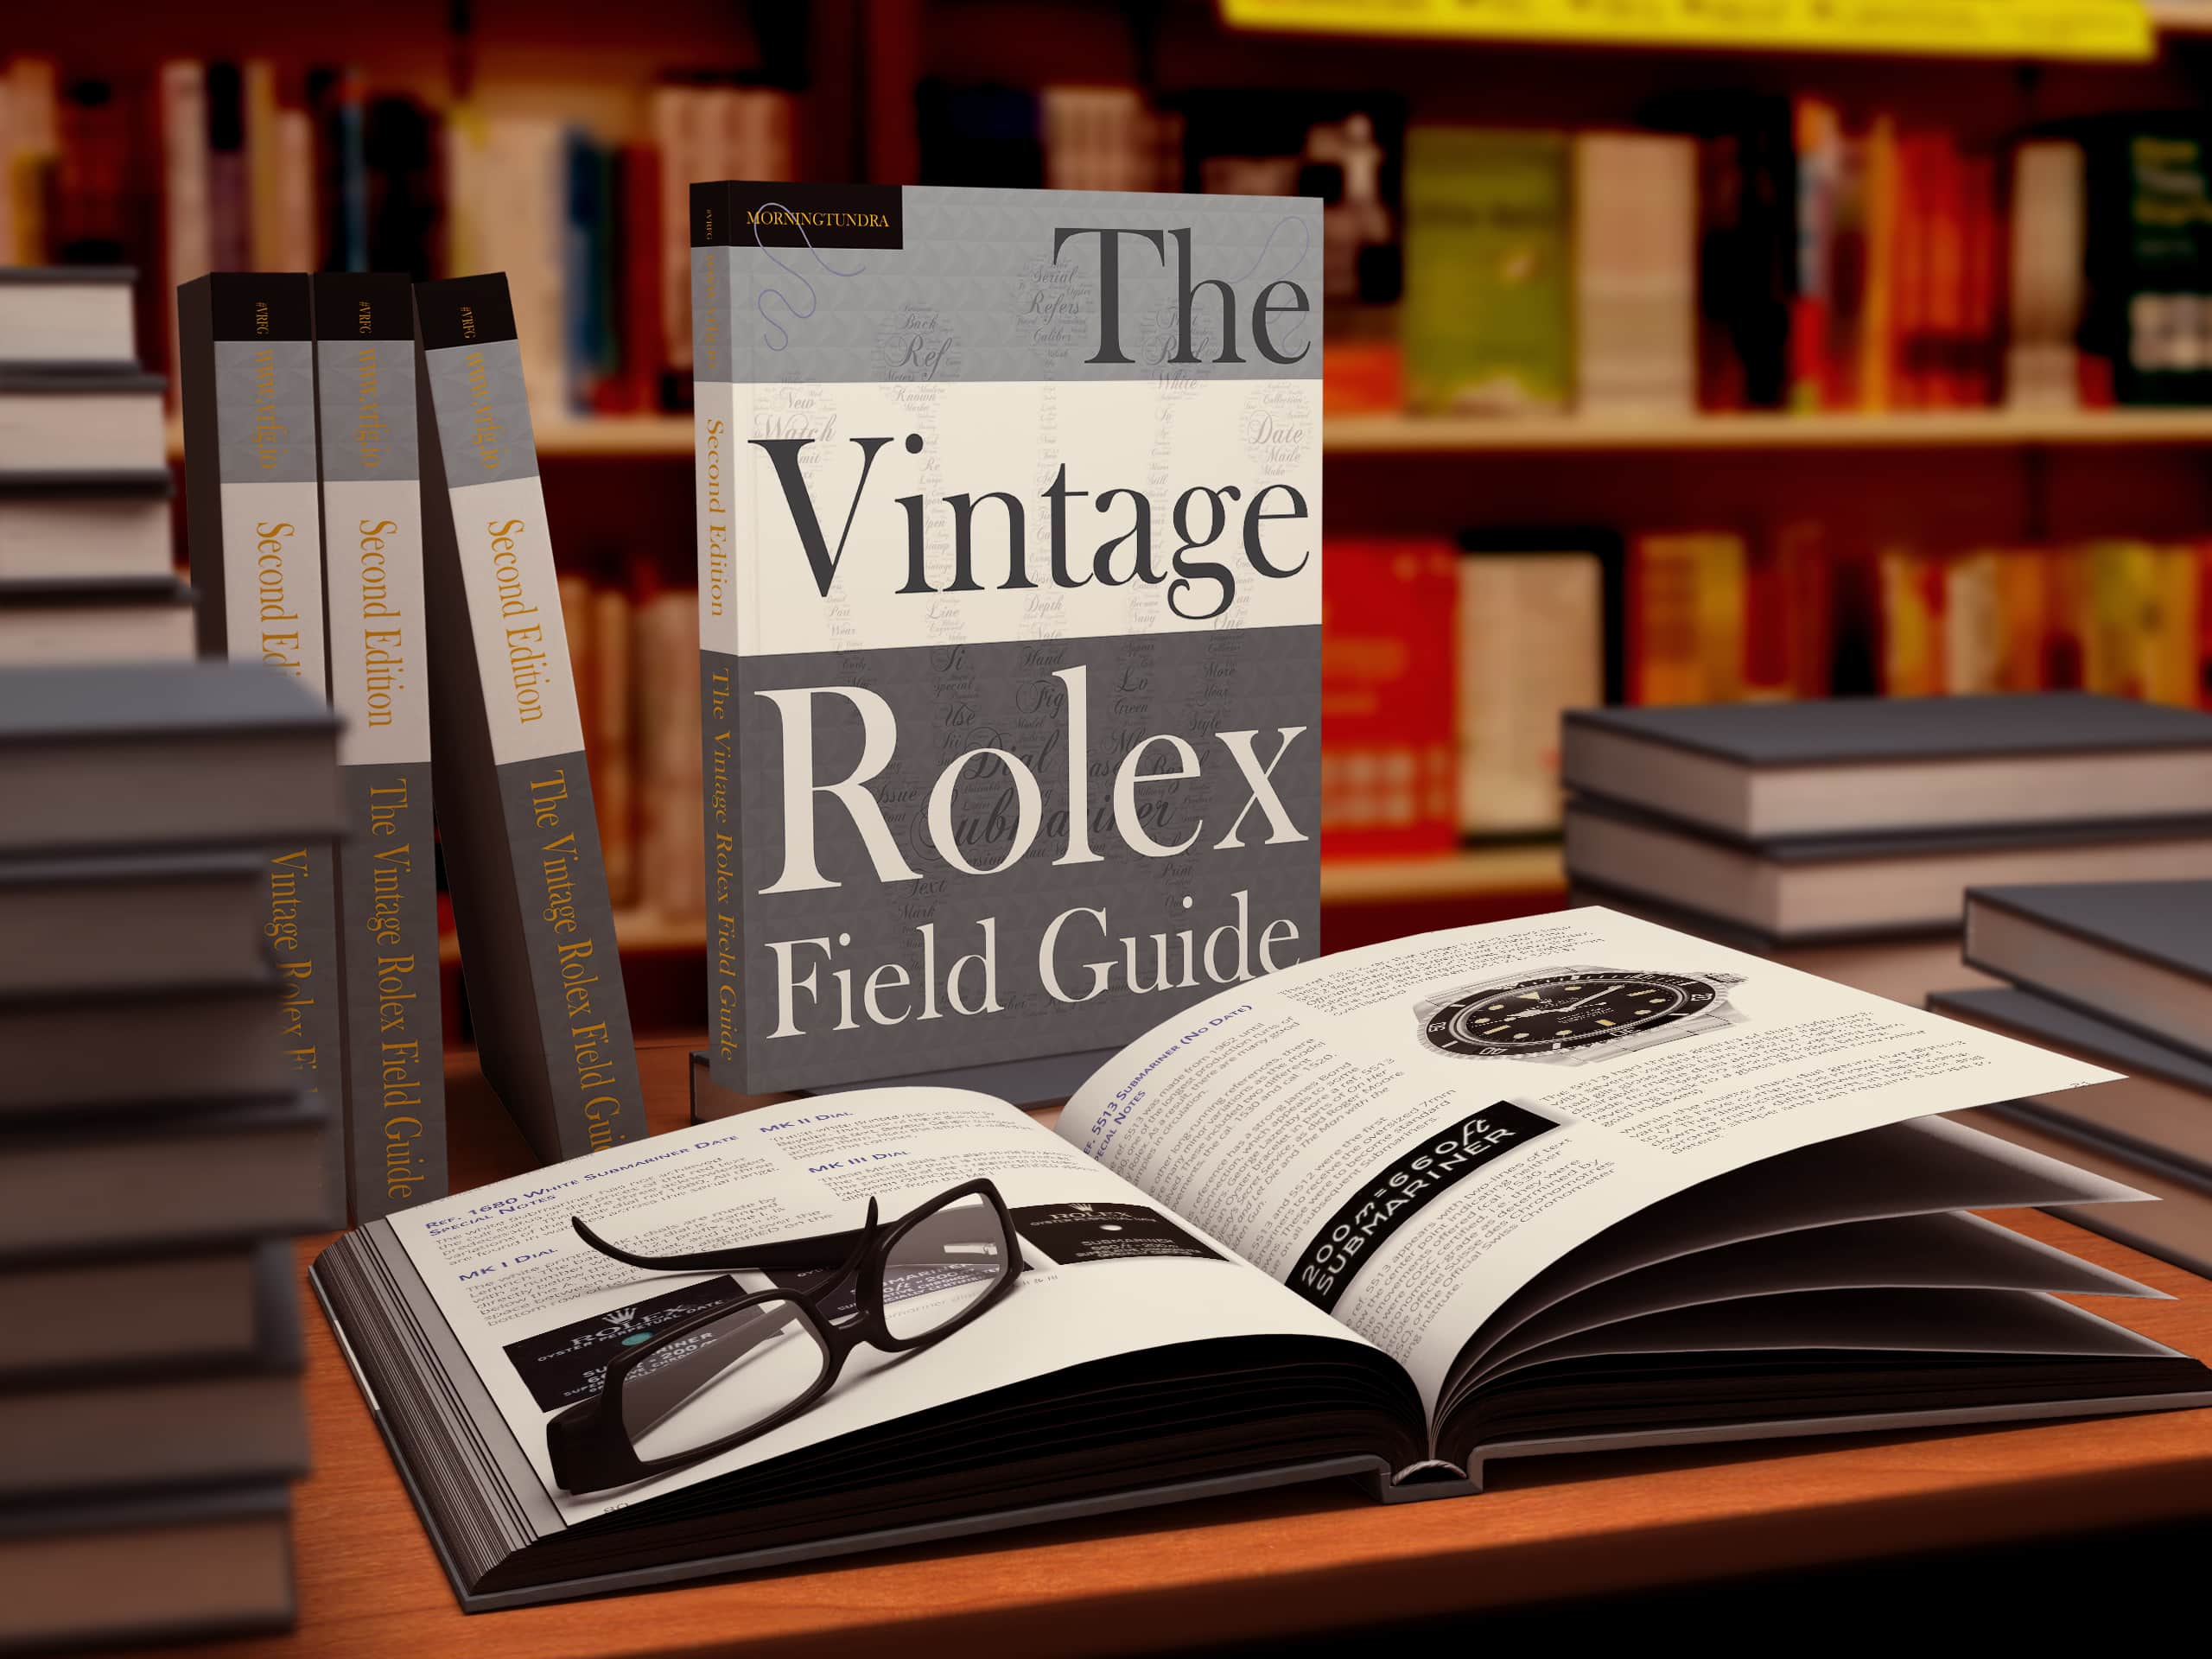 BOOK REVIEW: Vintage Rolex Field Guide by Morning - Watch Hunter - Watch Reviews, Photos and Articles